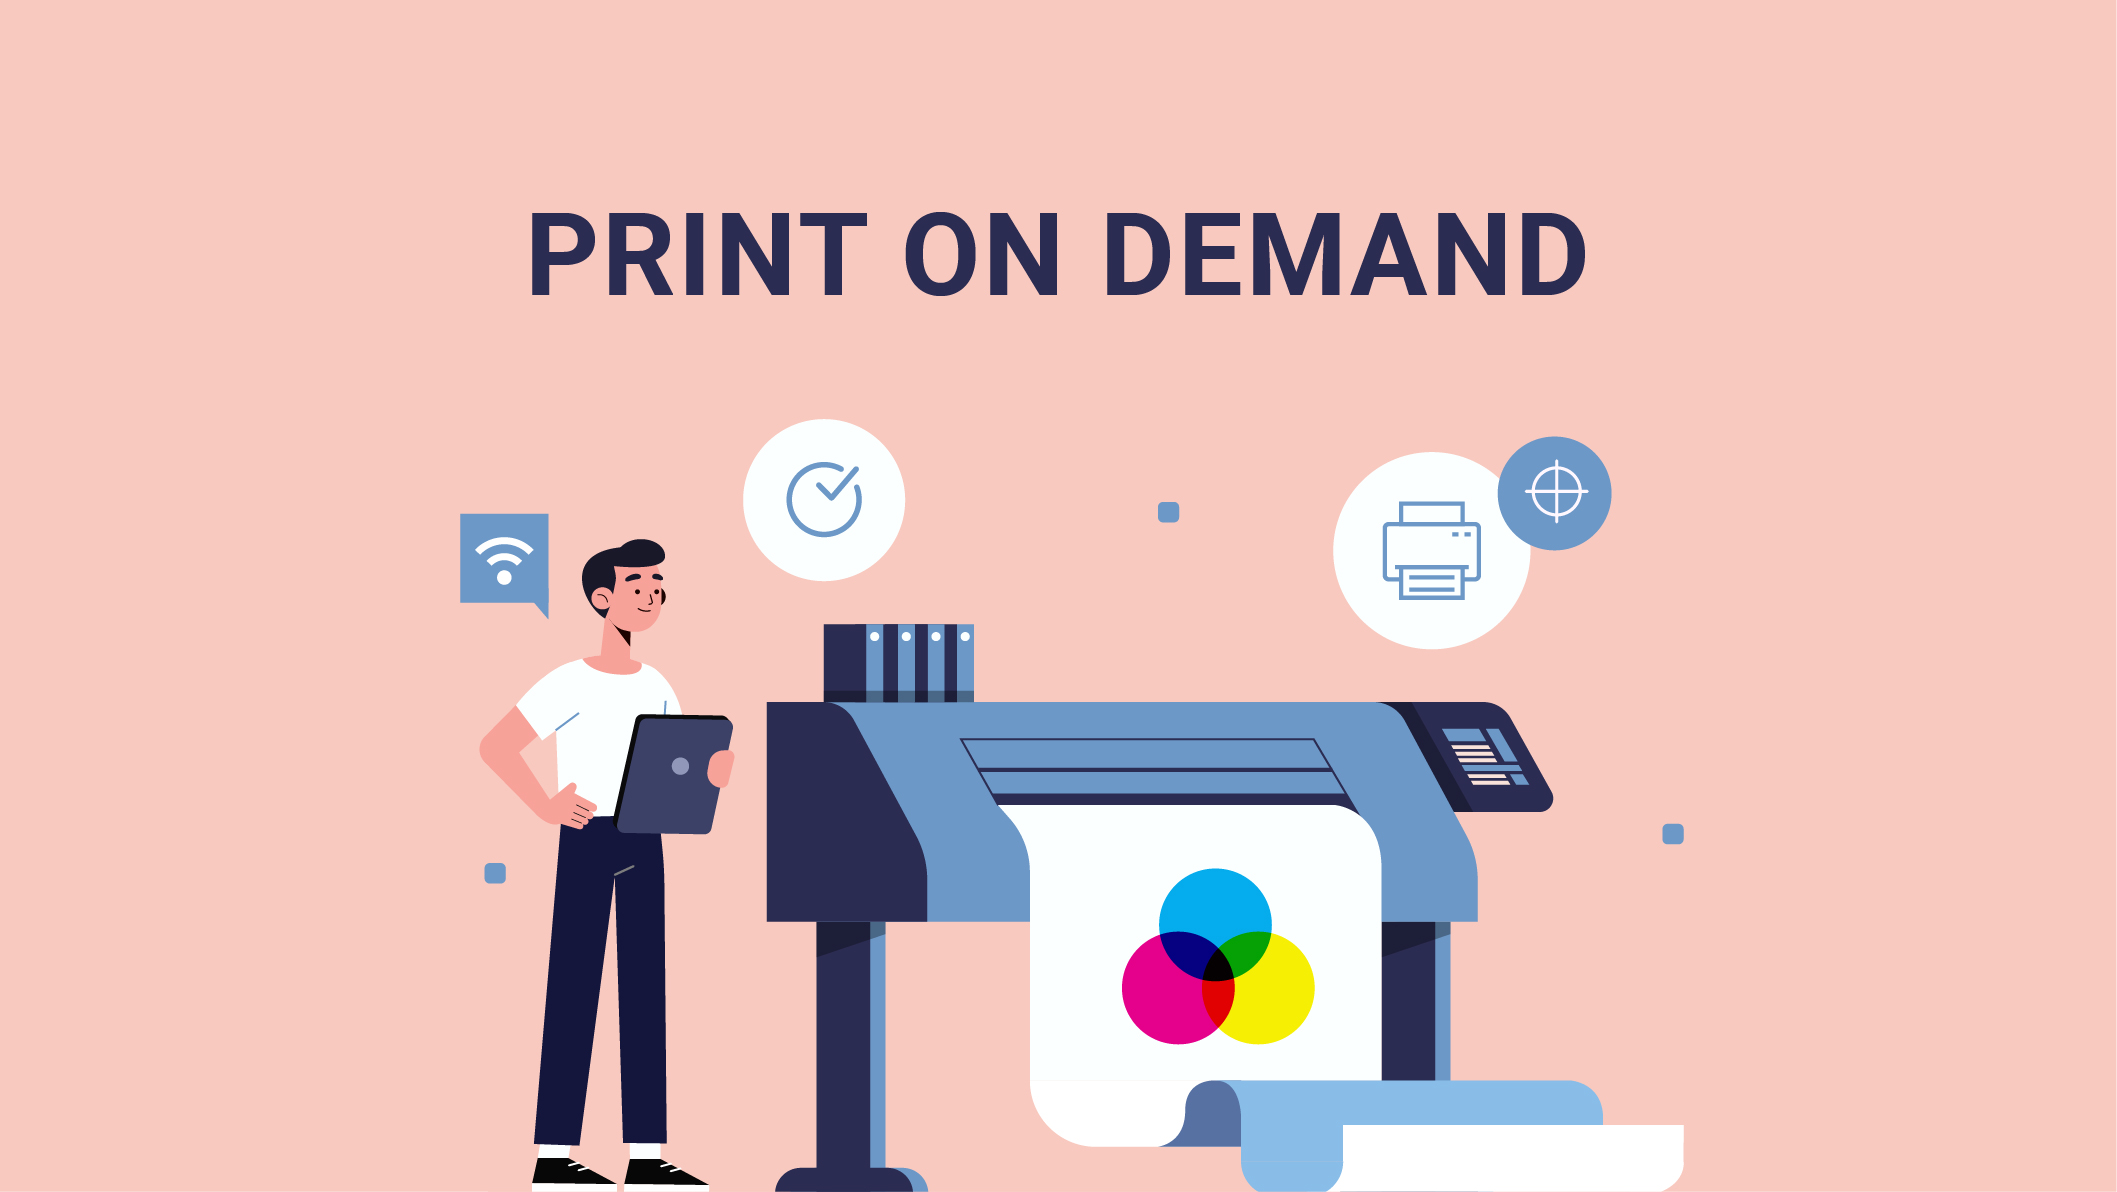 What is Print on Demand?